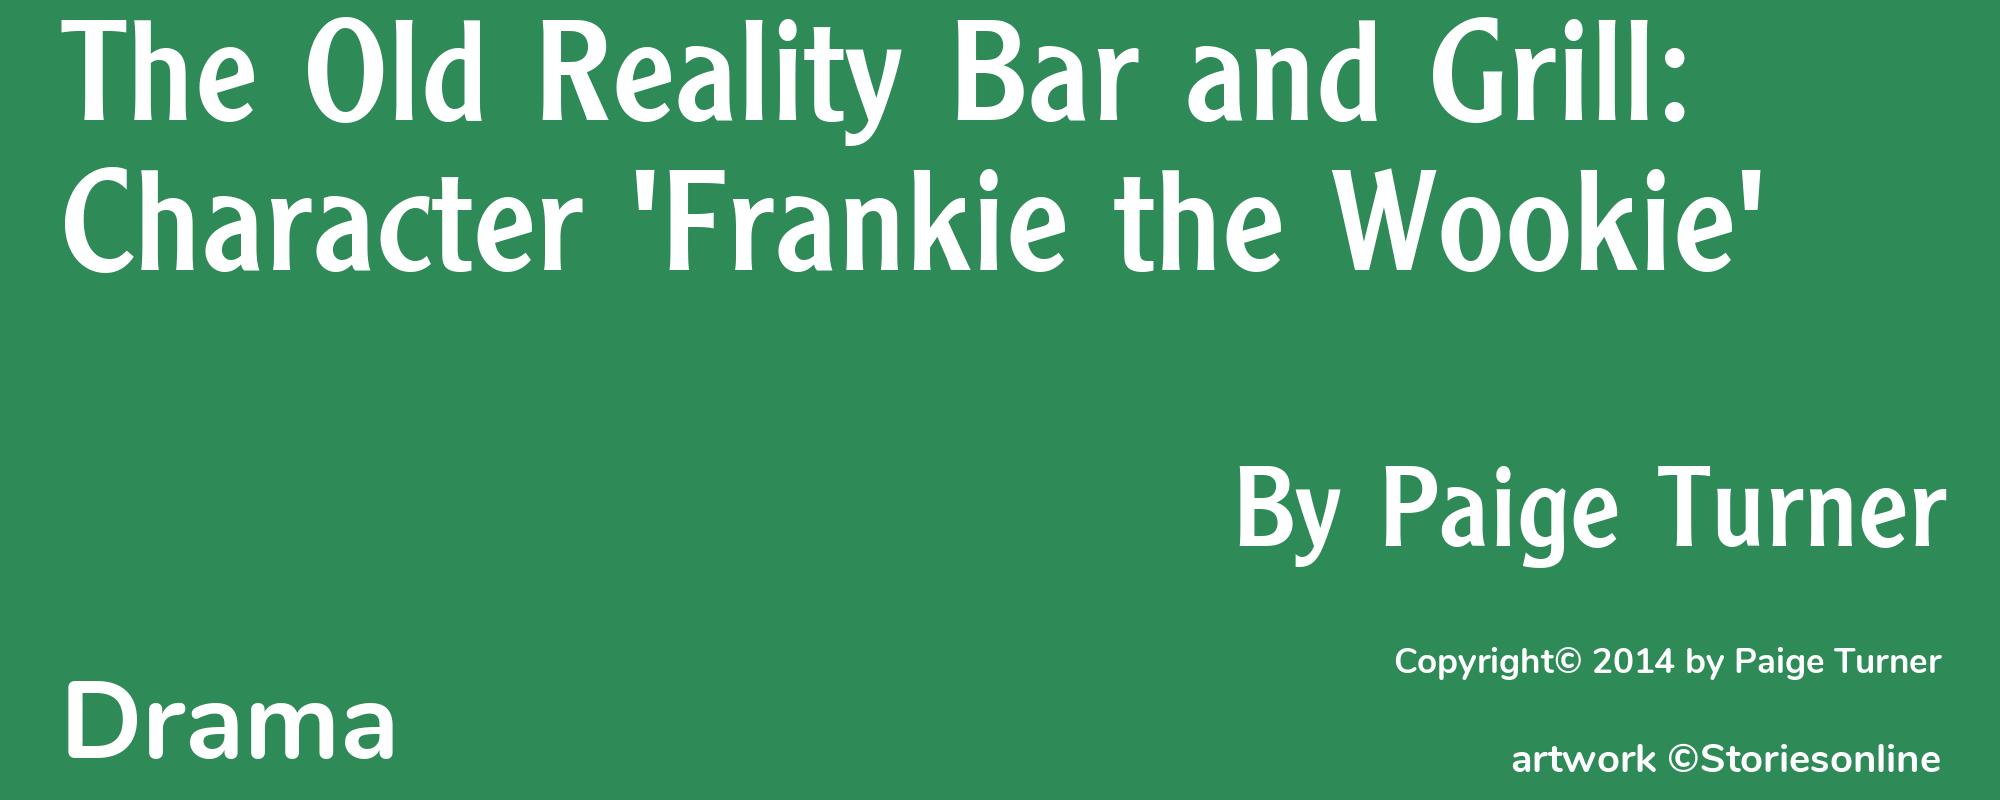 The Old Reality Bar and Grill: Character 'Frankie the Wookie' - Cover